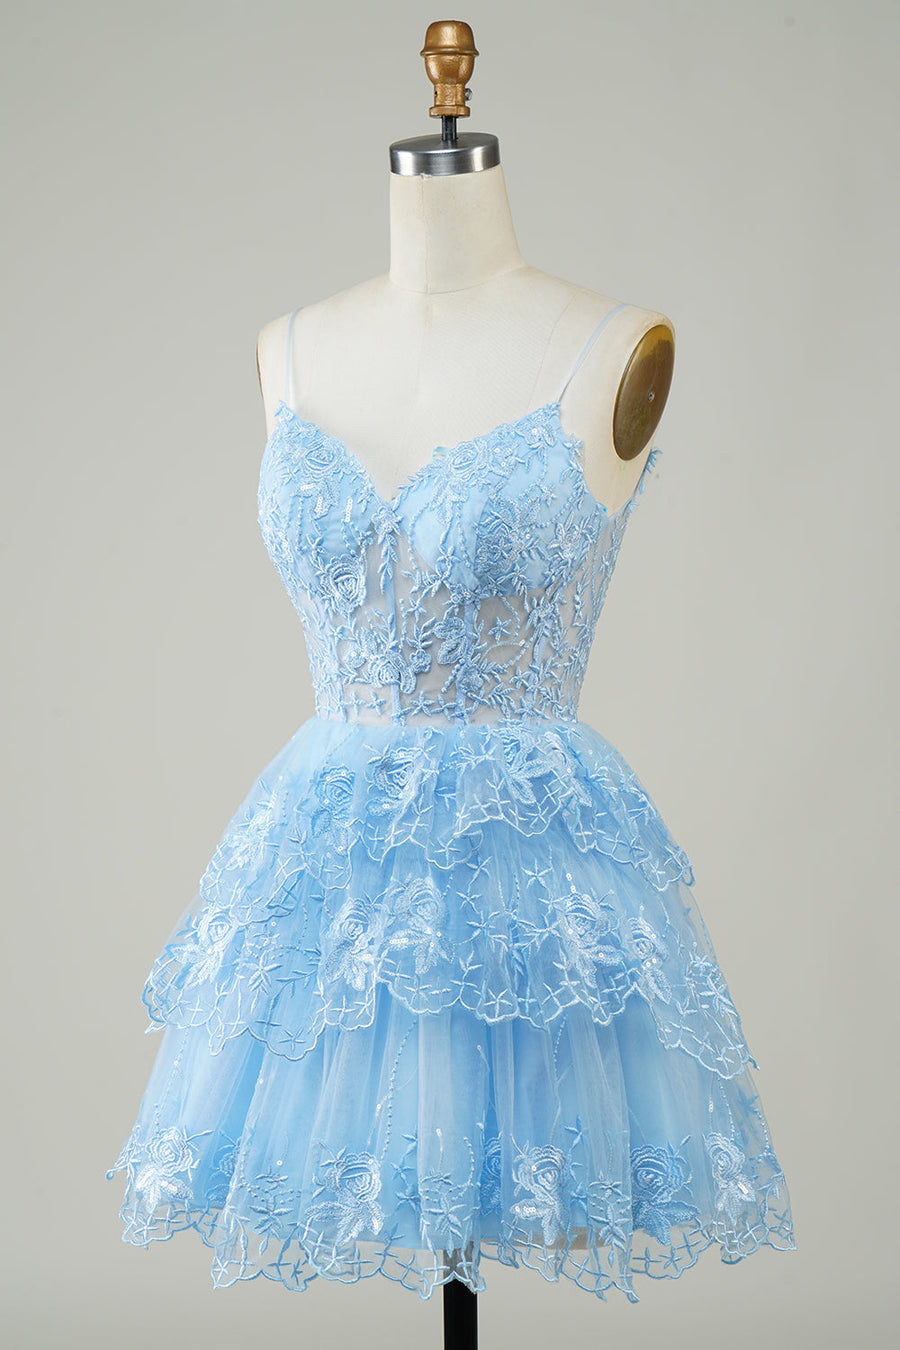 Glitter Lace Corset Ruffle Tiered Short Homecoming Dress in light blue